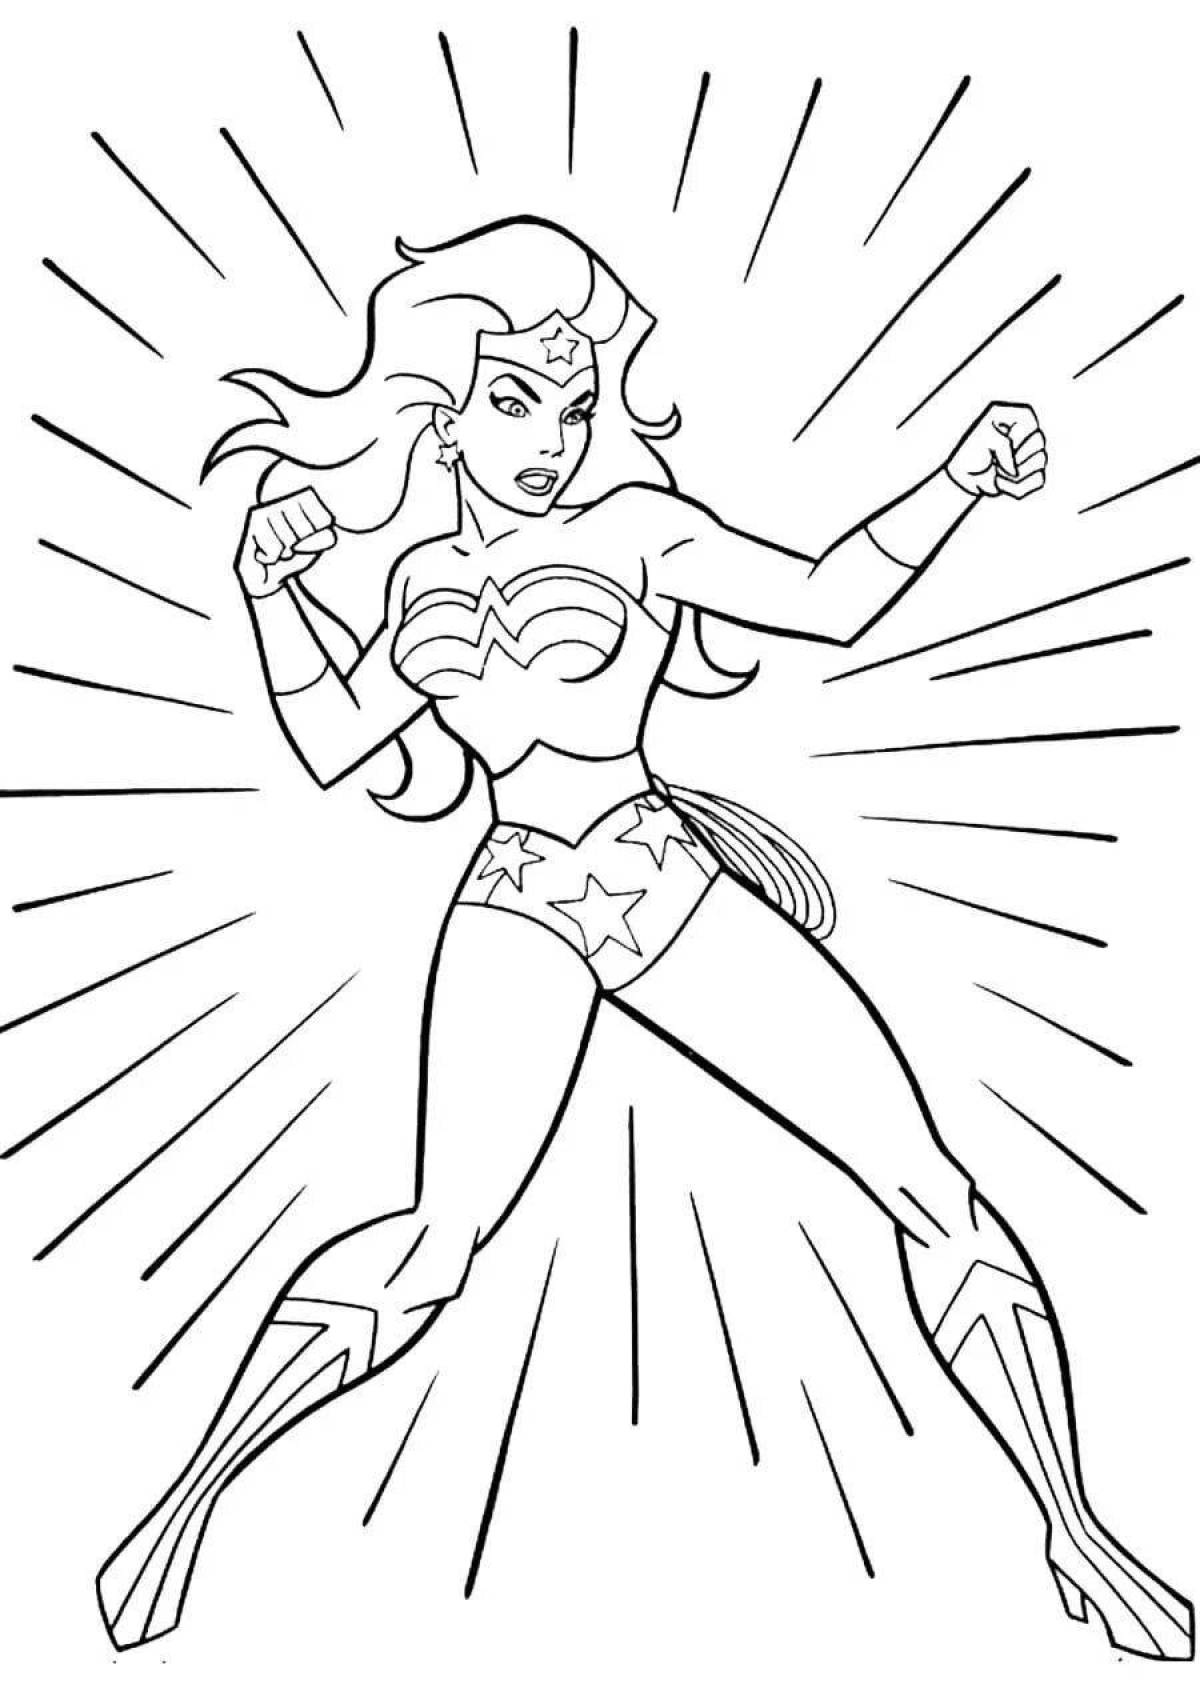 Colorfully designed superwoman coloring page